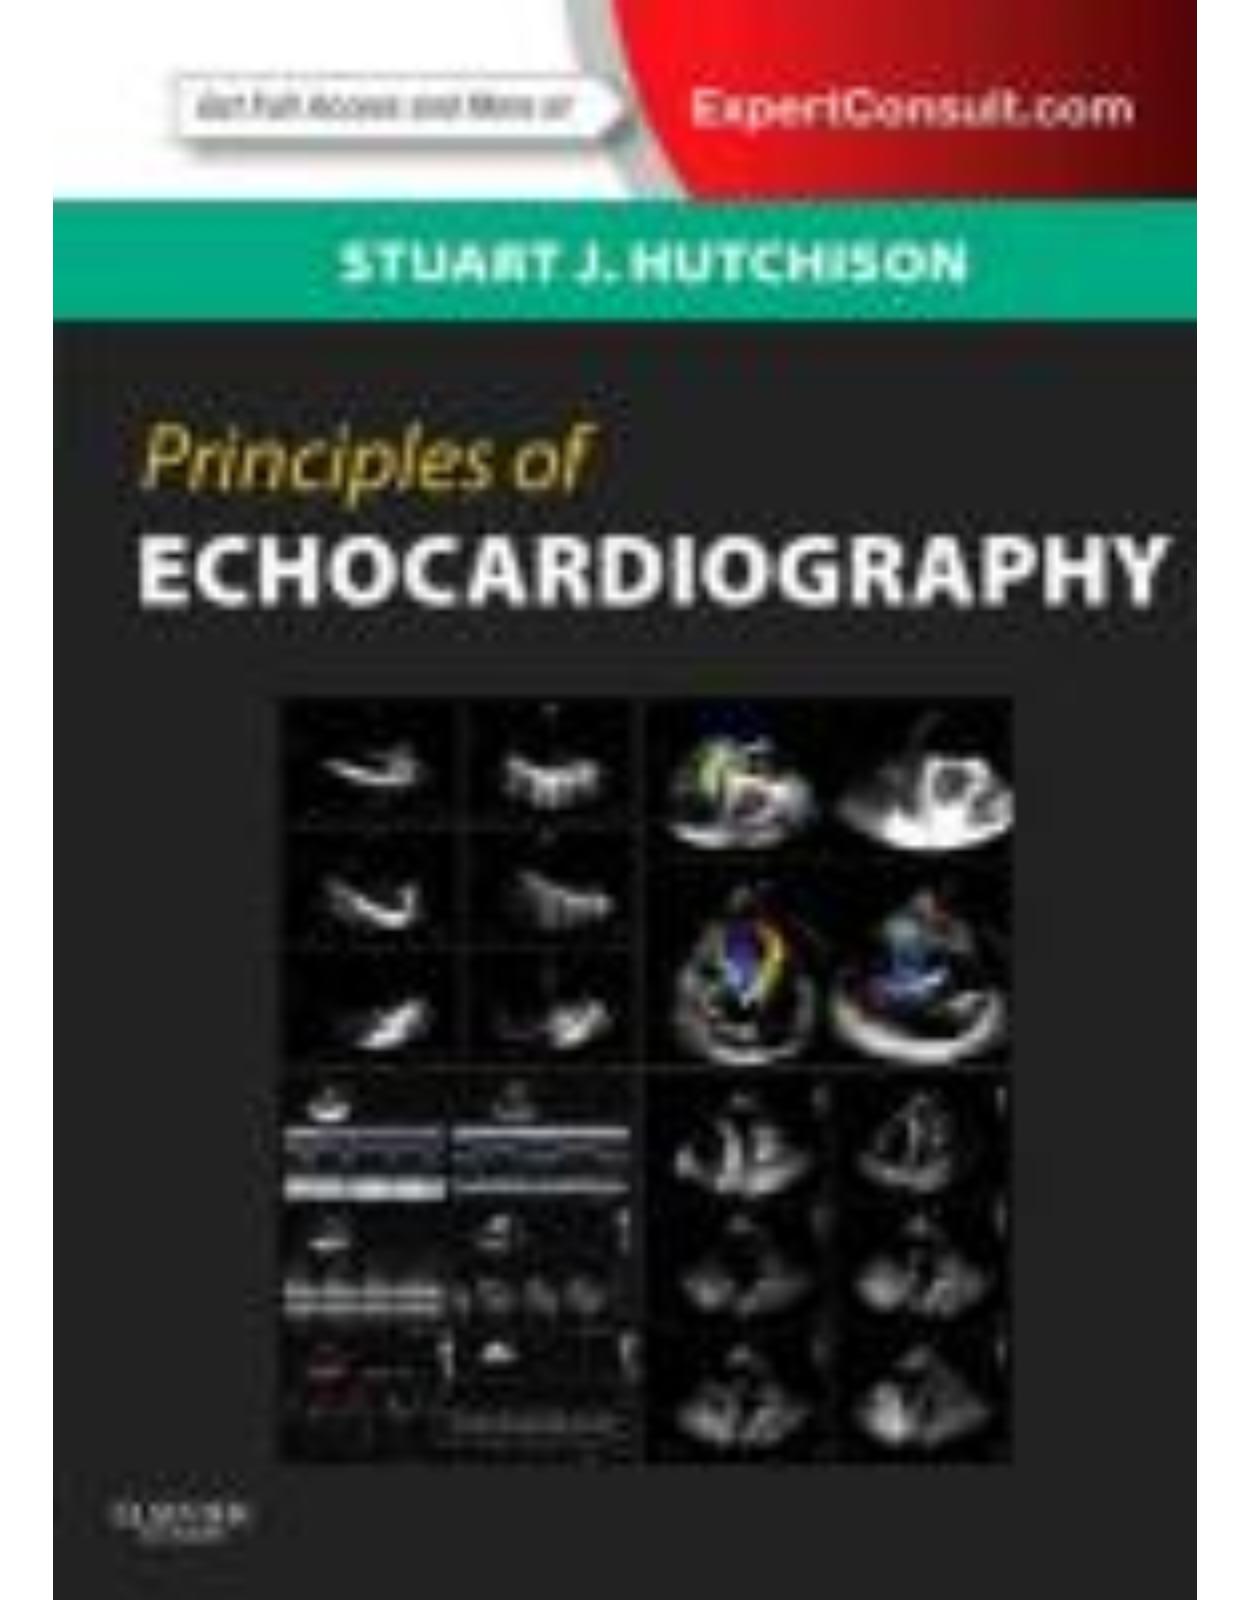 Principles of Echocardiography and Intracardiac Echocardiography Expert Consult – Online and Print